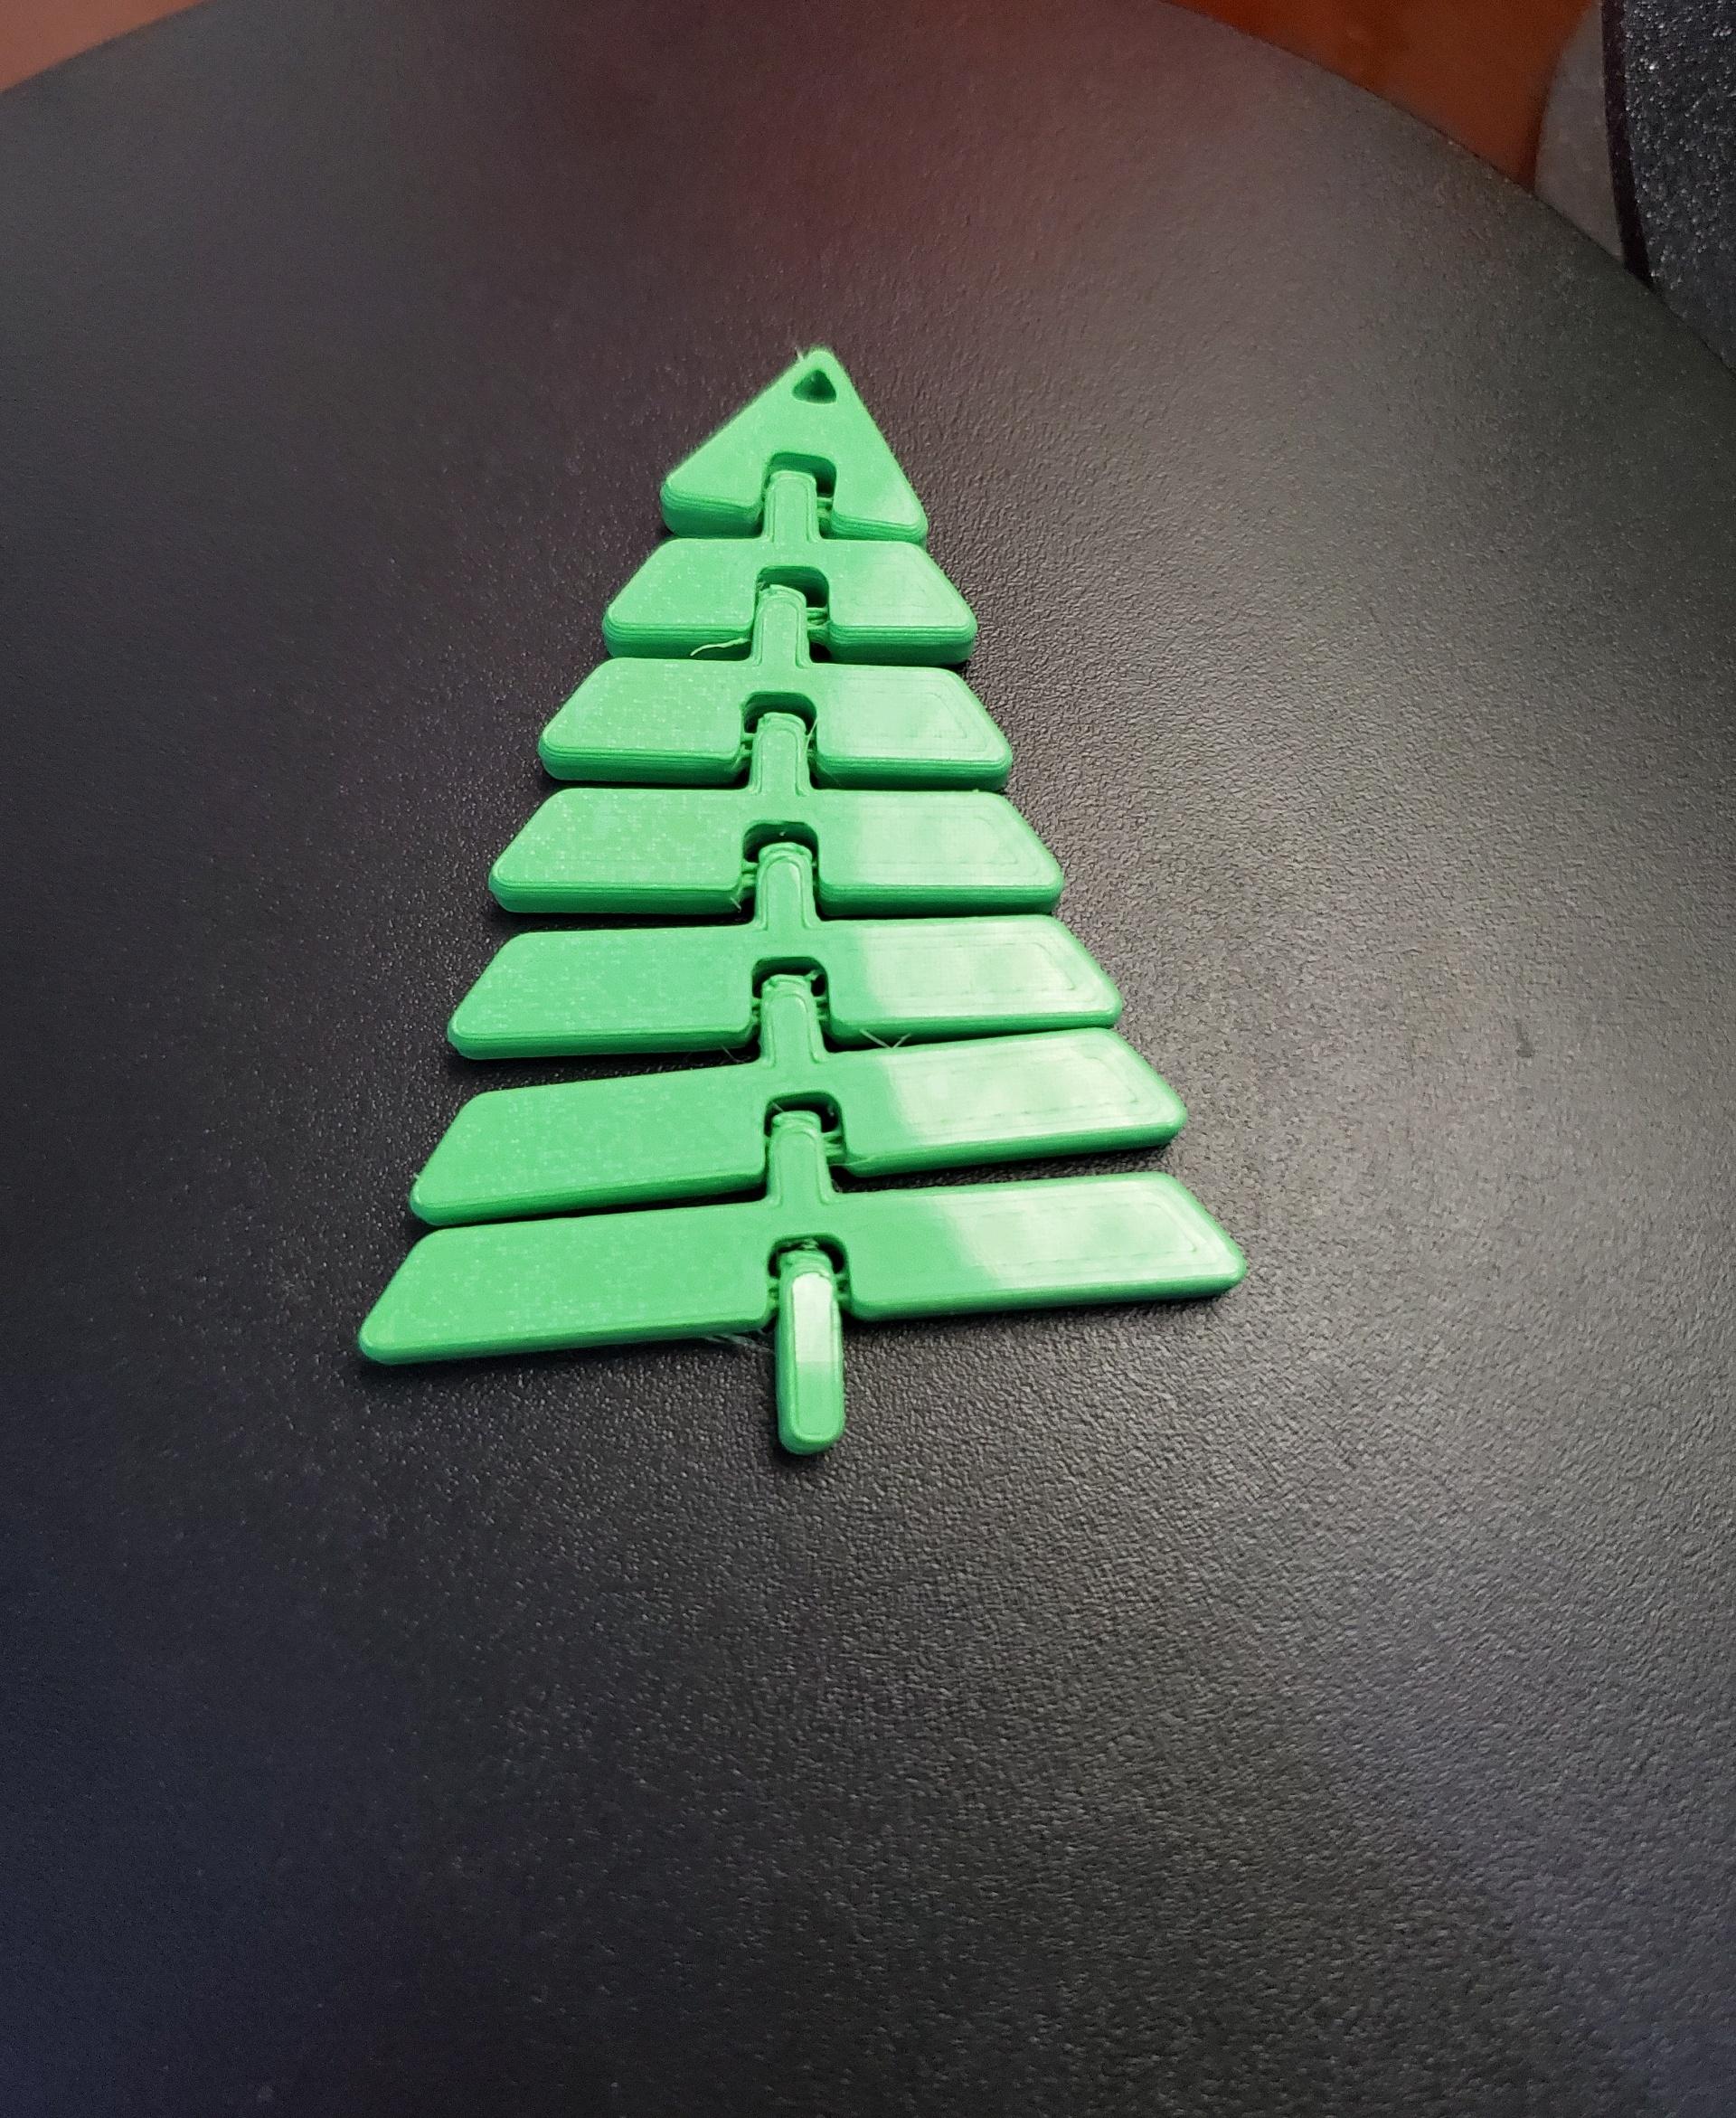 Articulated Christmas Tree Keychain - Print in place fidget toy - polyterra forest green - 3d model